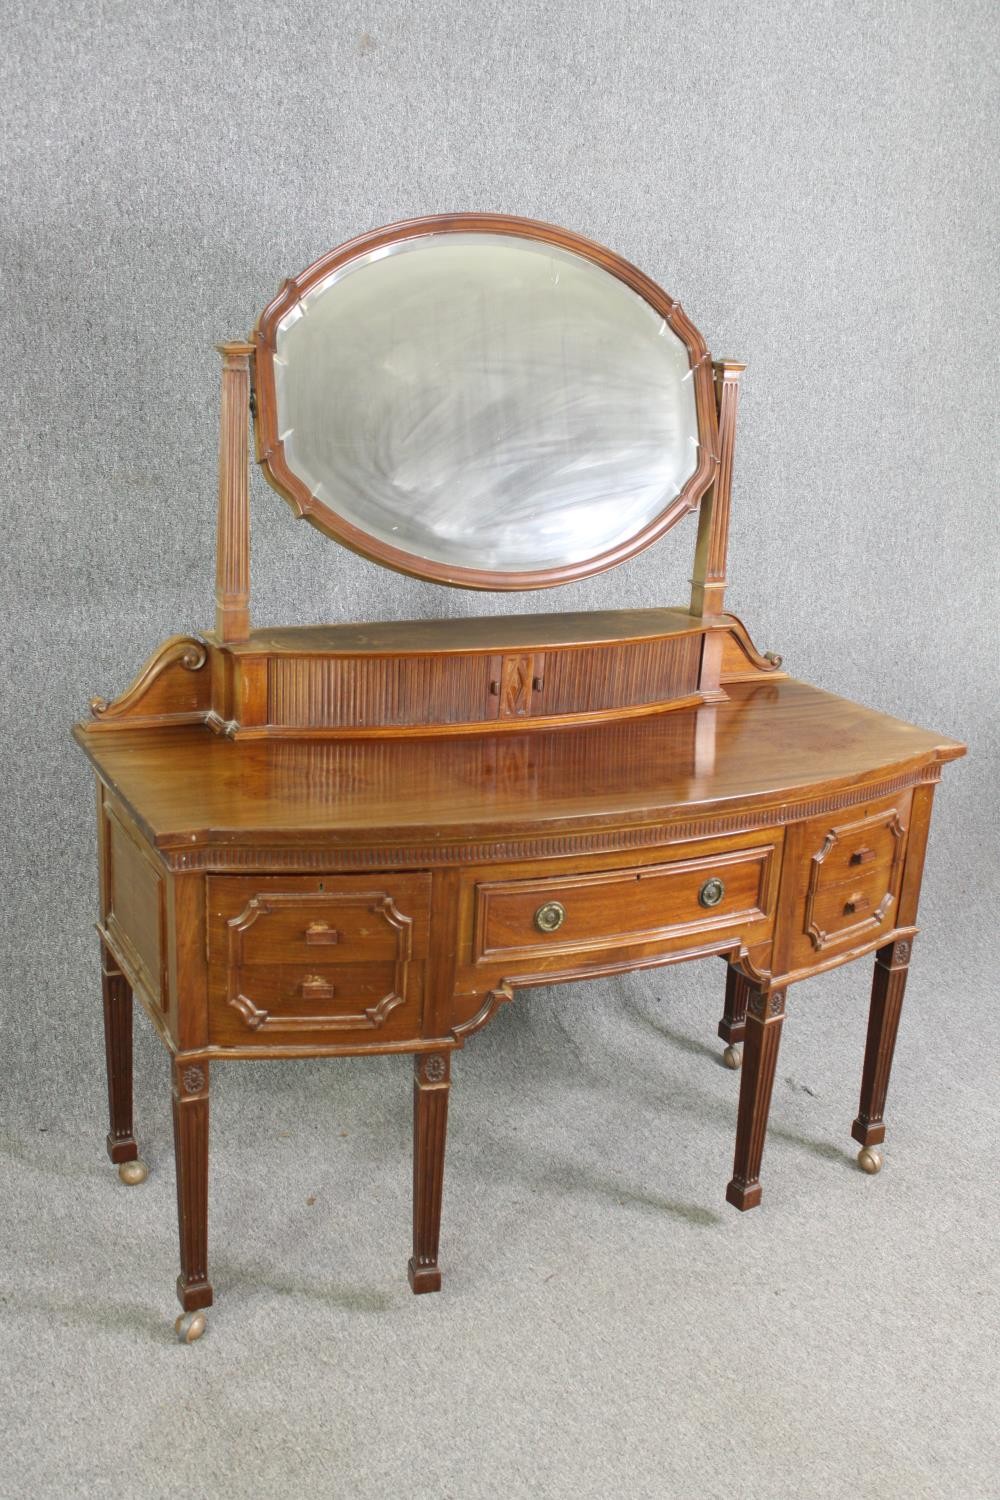 A George III style walnut dressing table, 20th century. H.164 W.136 D.63cm. - Image 3 of 10